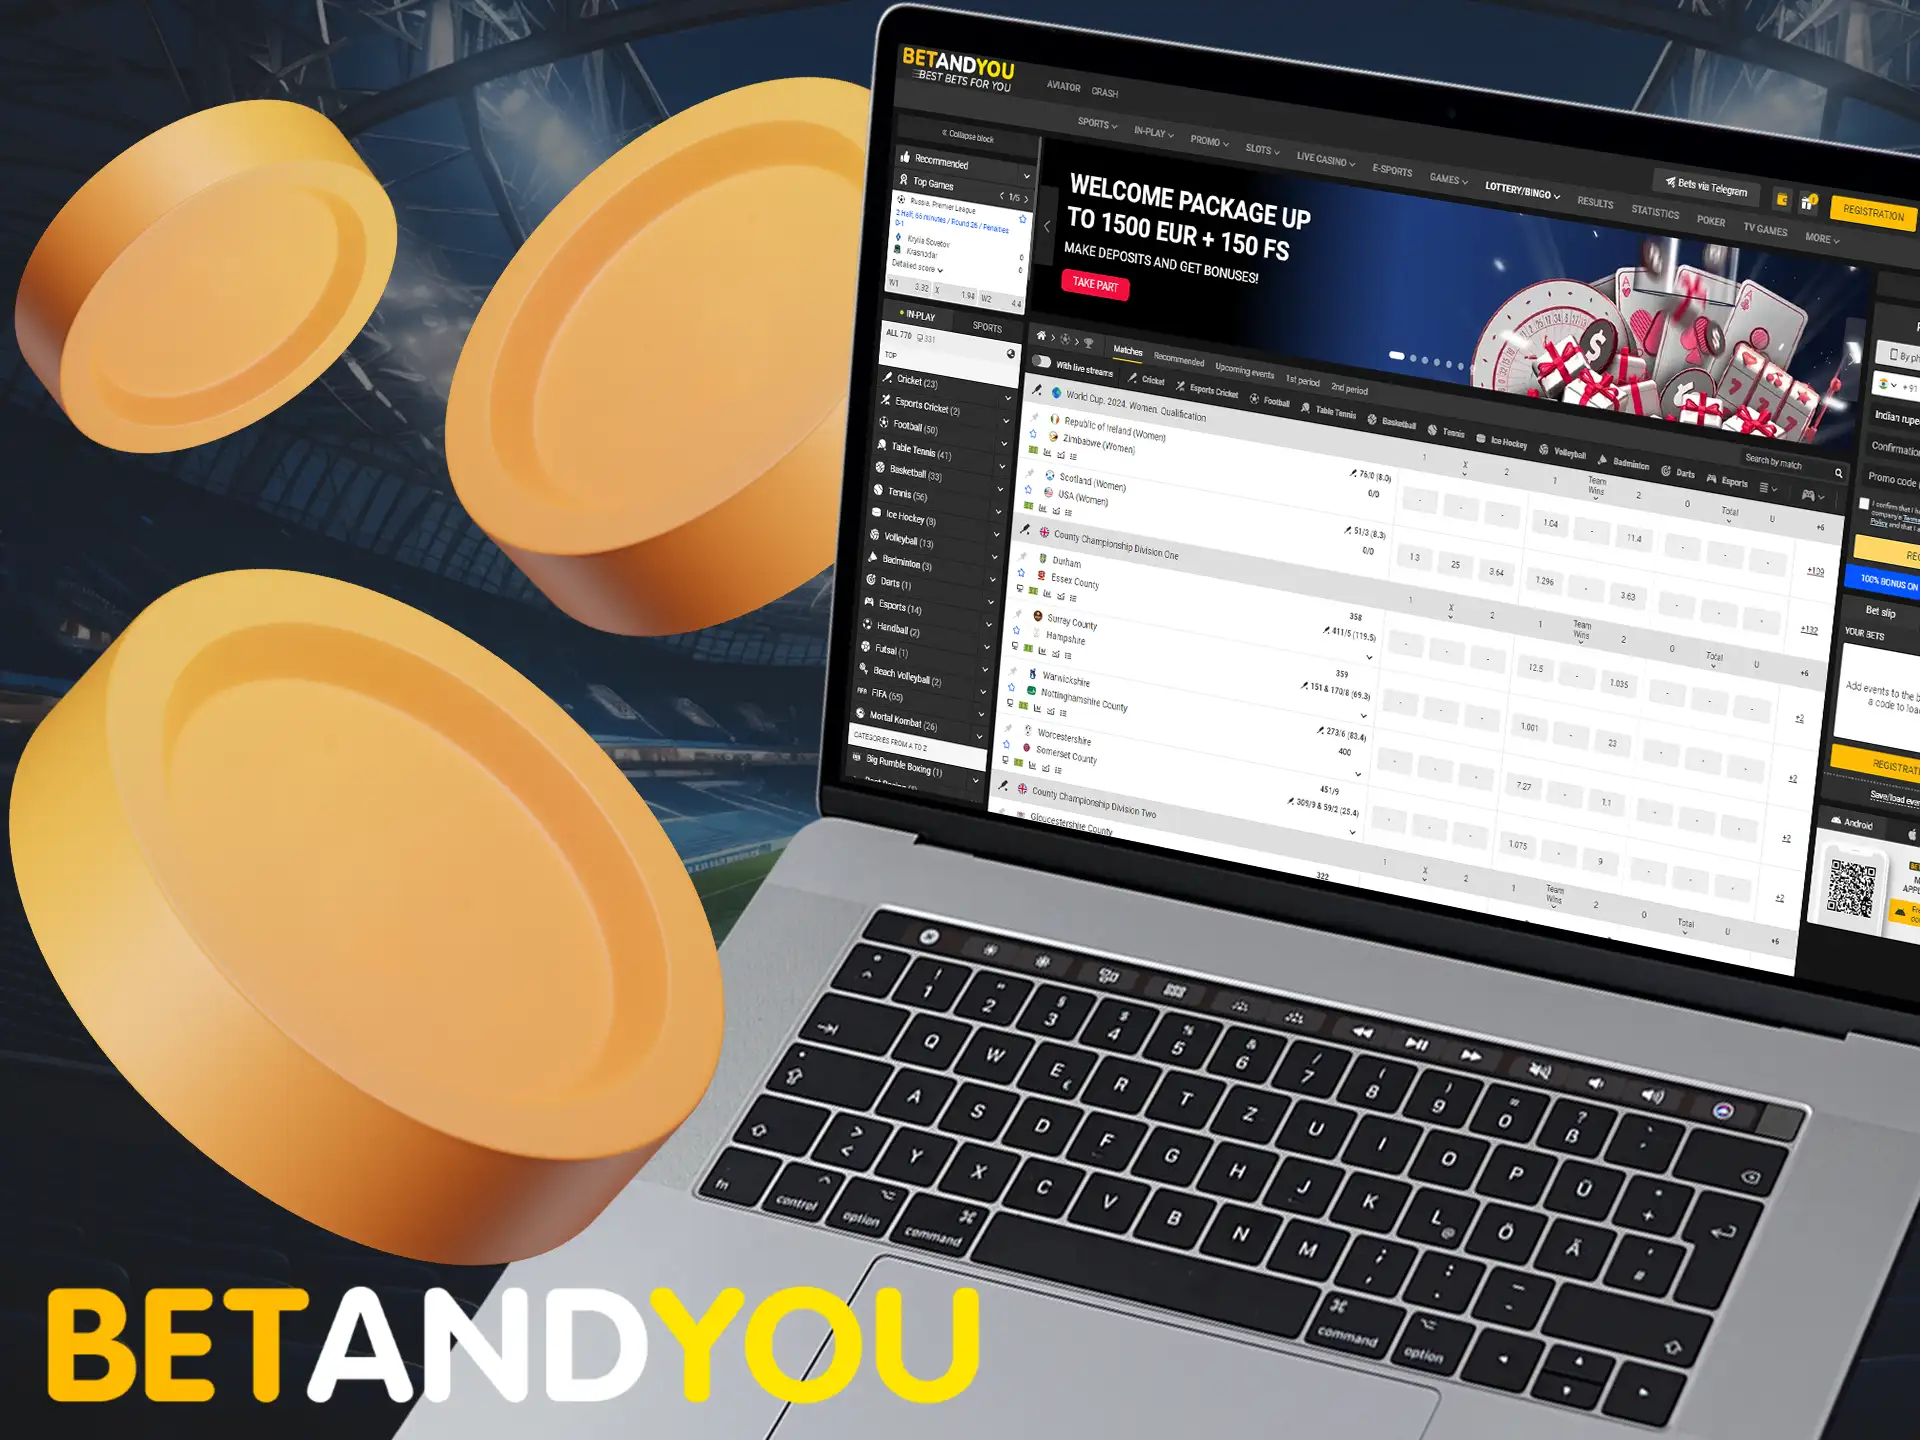 For desktop users, Betandyou has developed a PC application that provides full access to the platform.